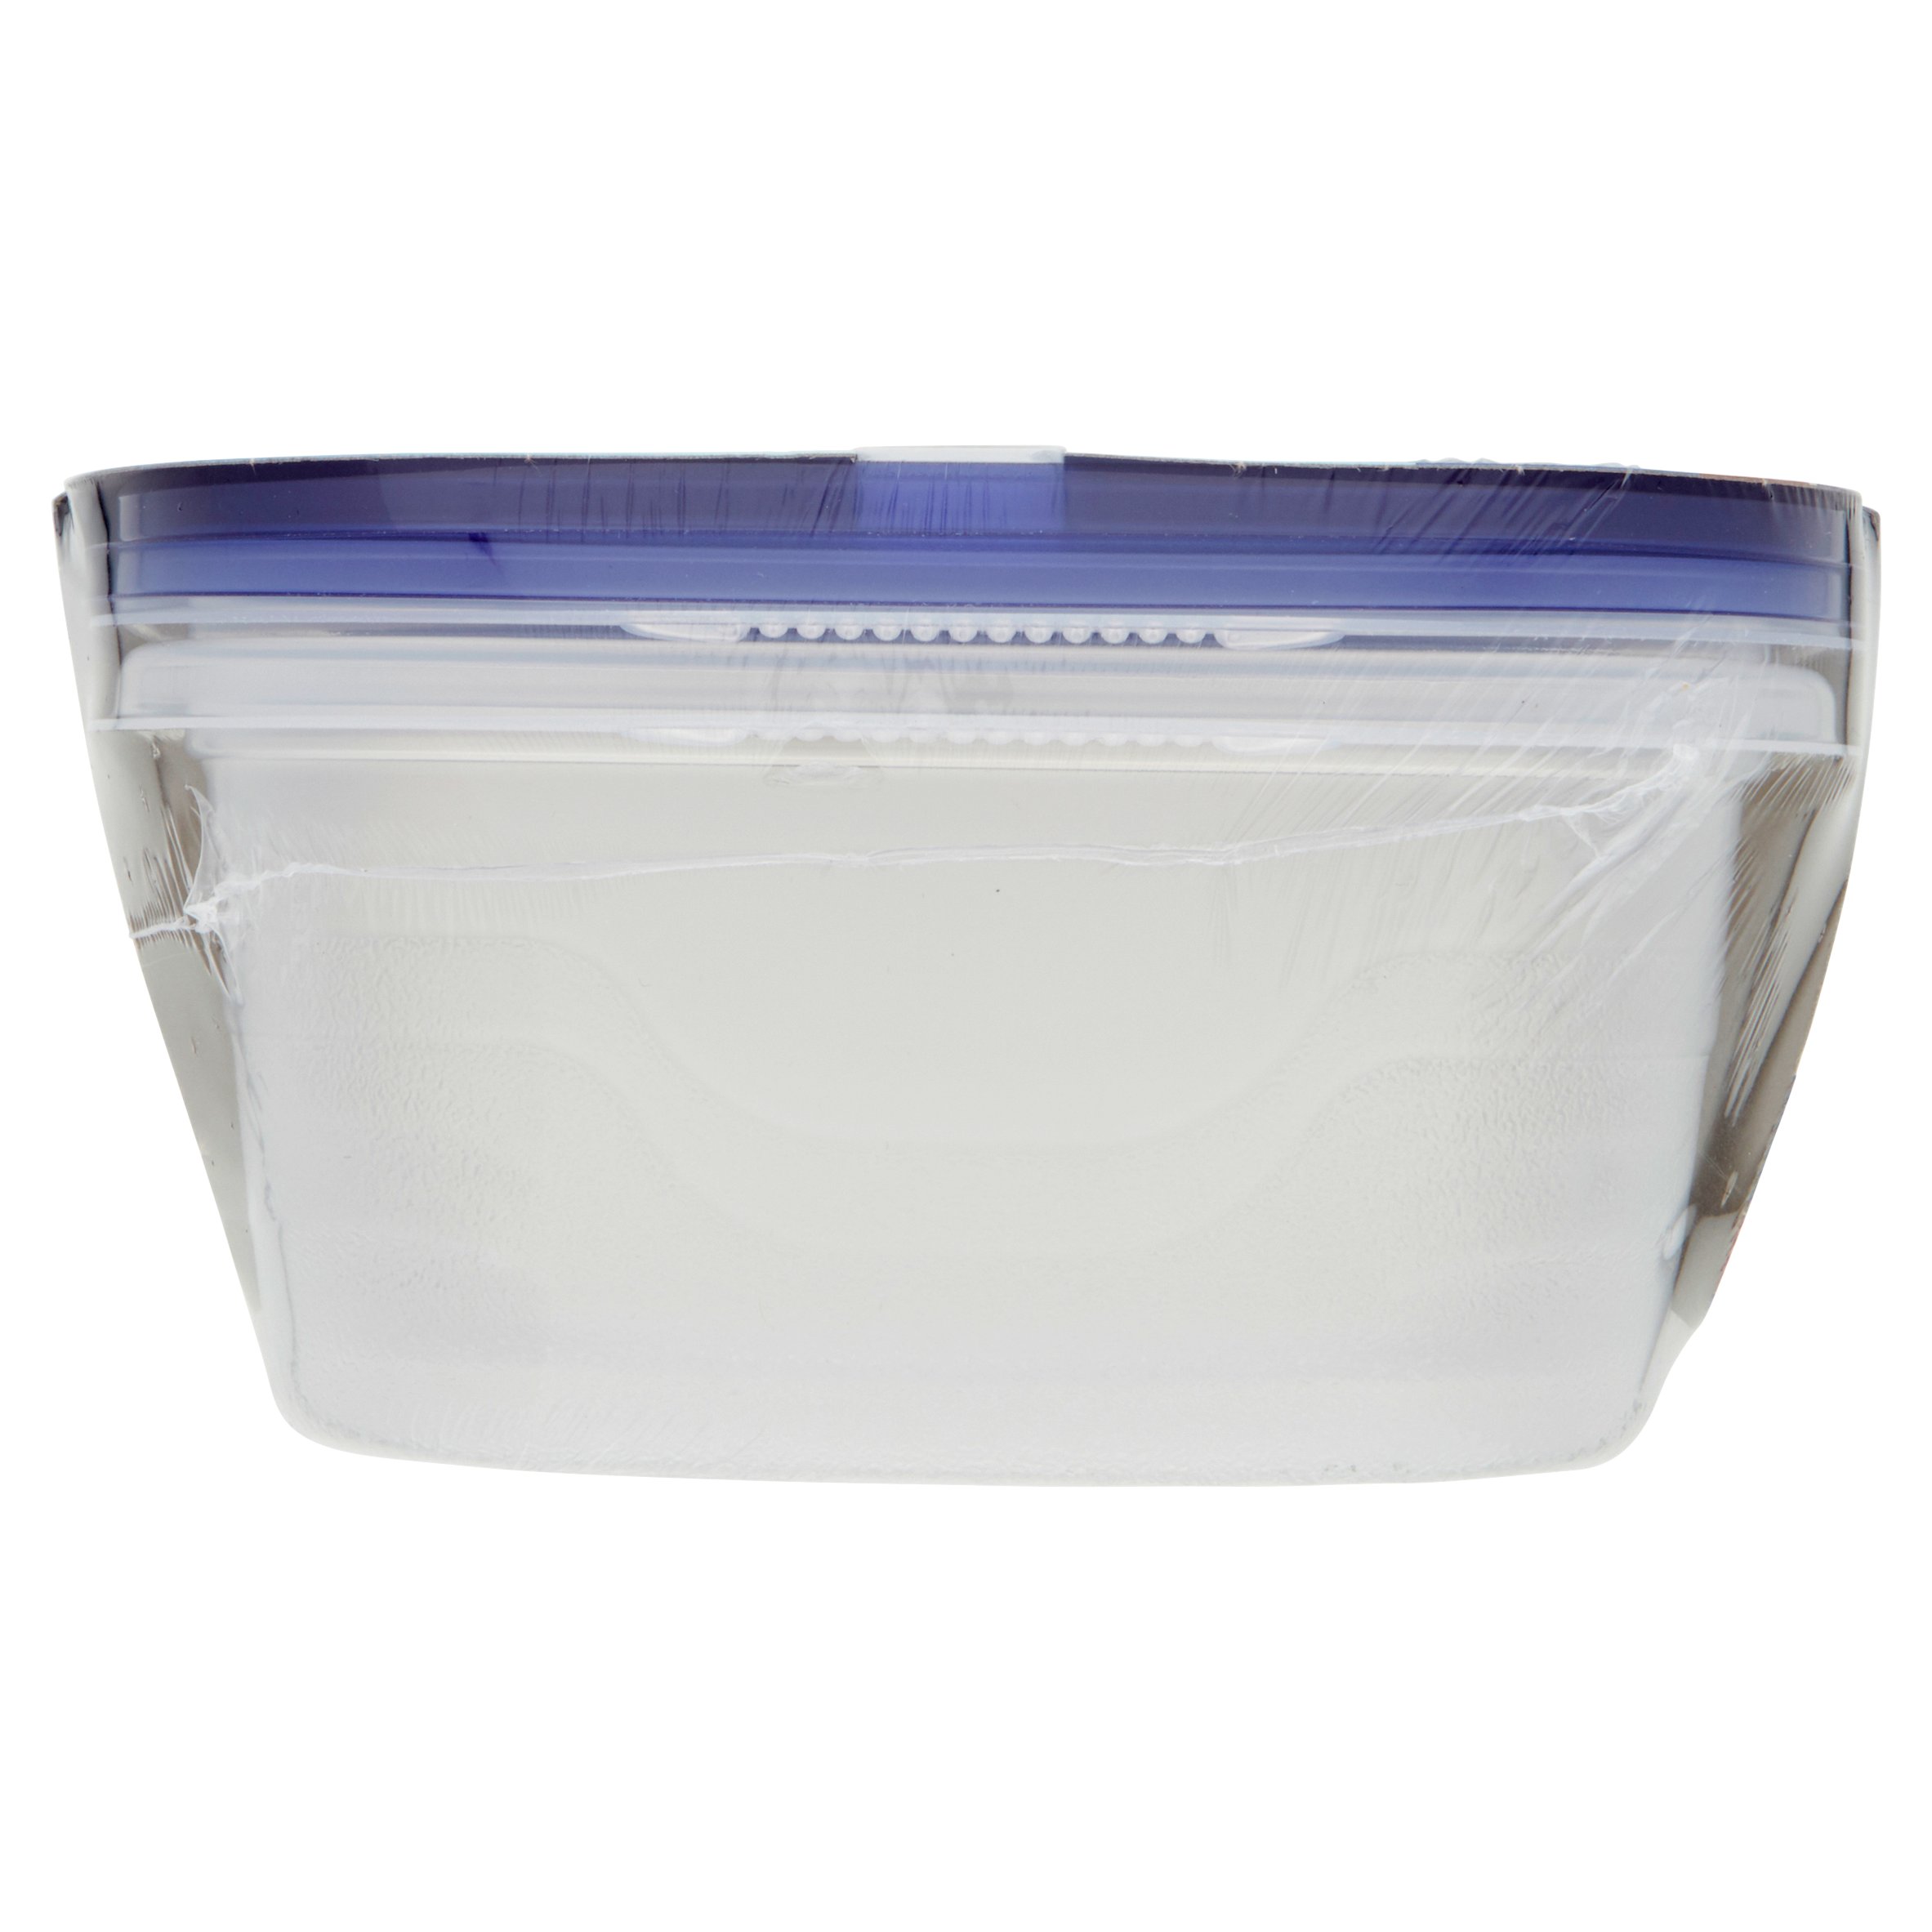 Great Value Take Outs Storage Container, BPA Free, Large Rectangle, 2 Count - image 3 of 5